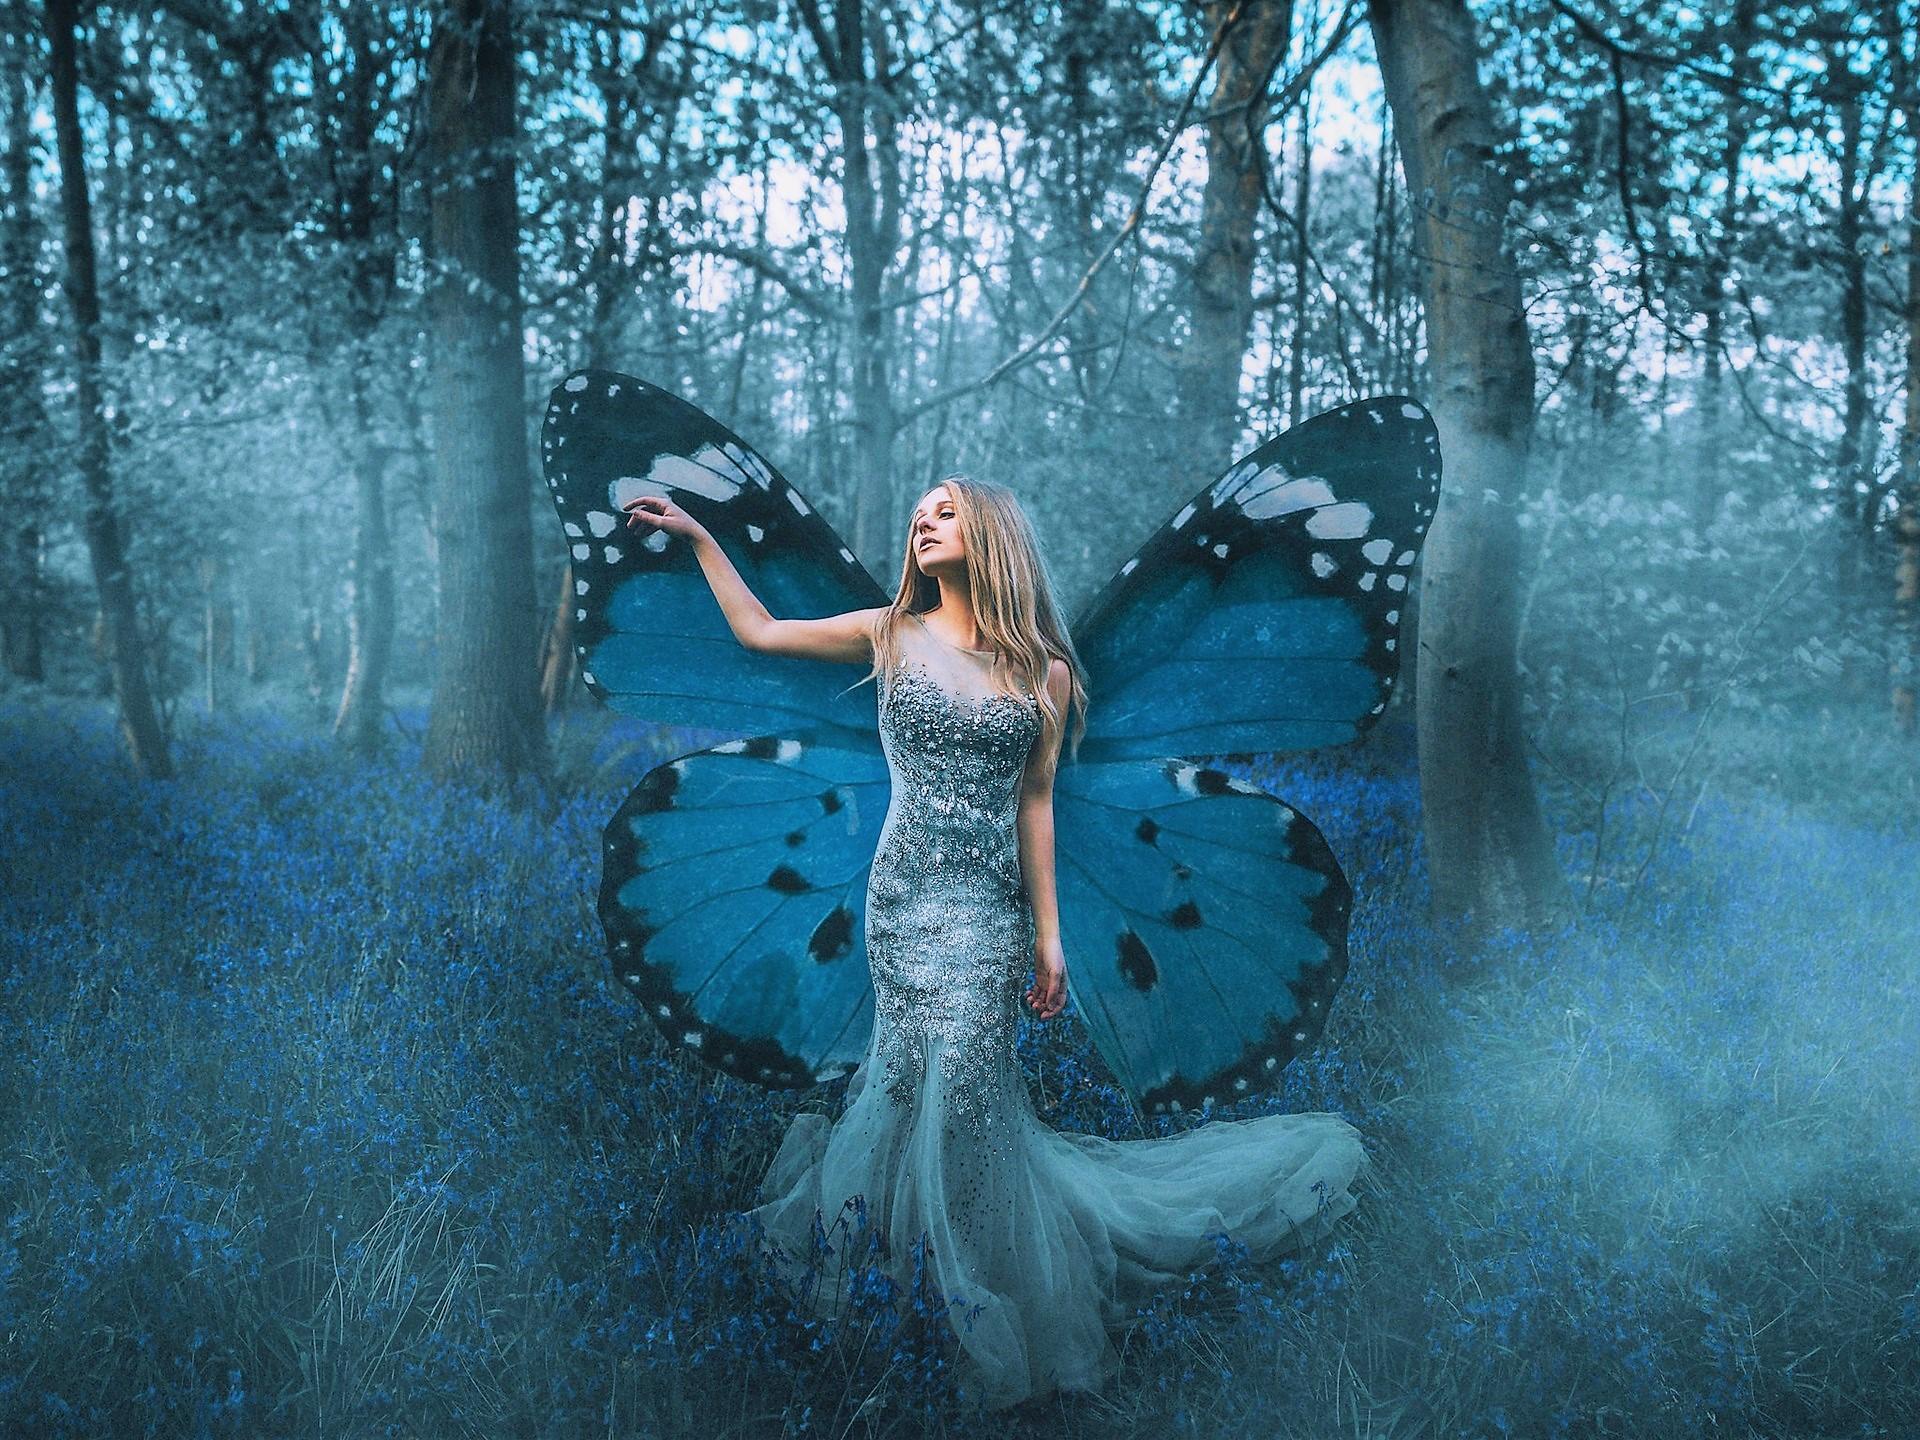 Butterfly Fairy in the Forest HD Wallpaper. Background Image